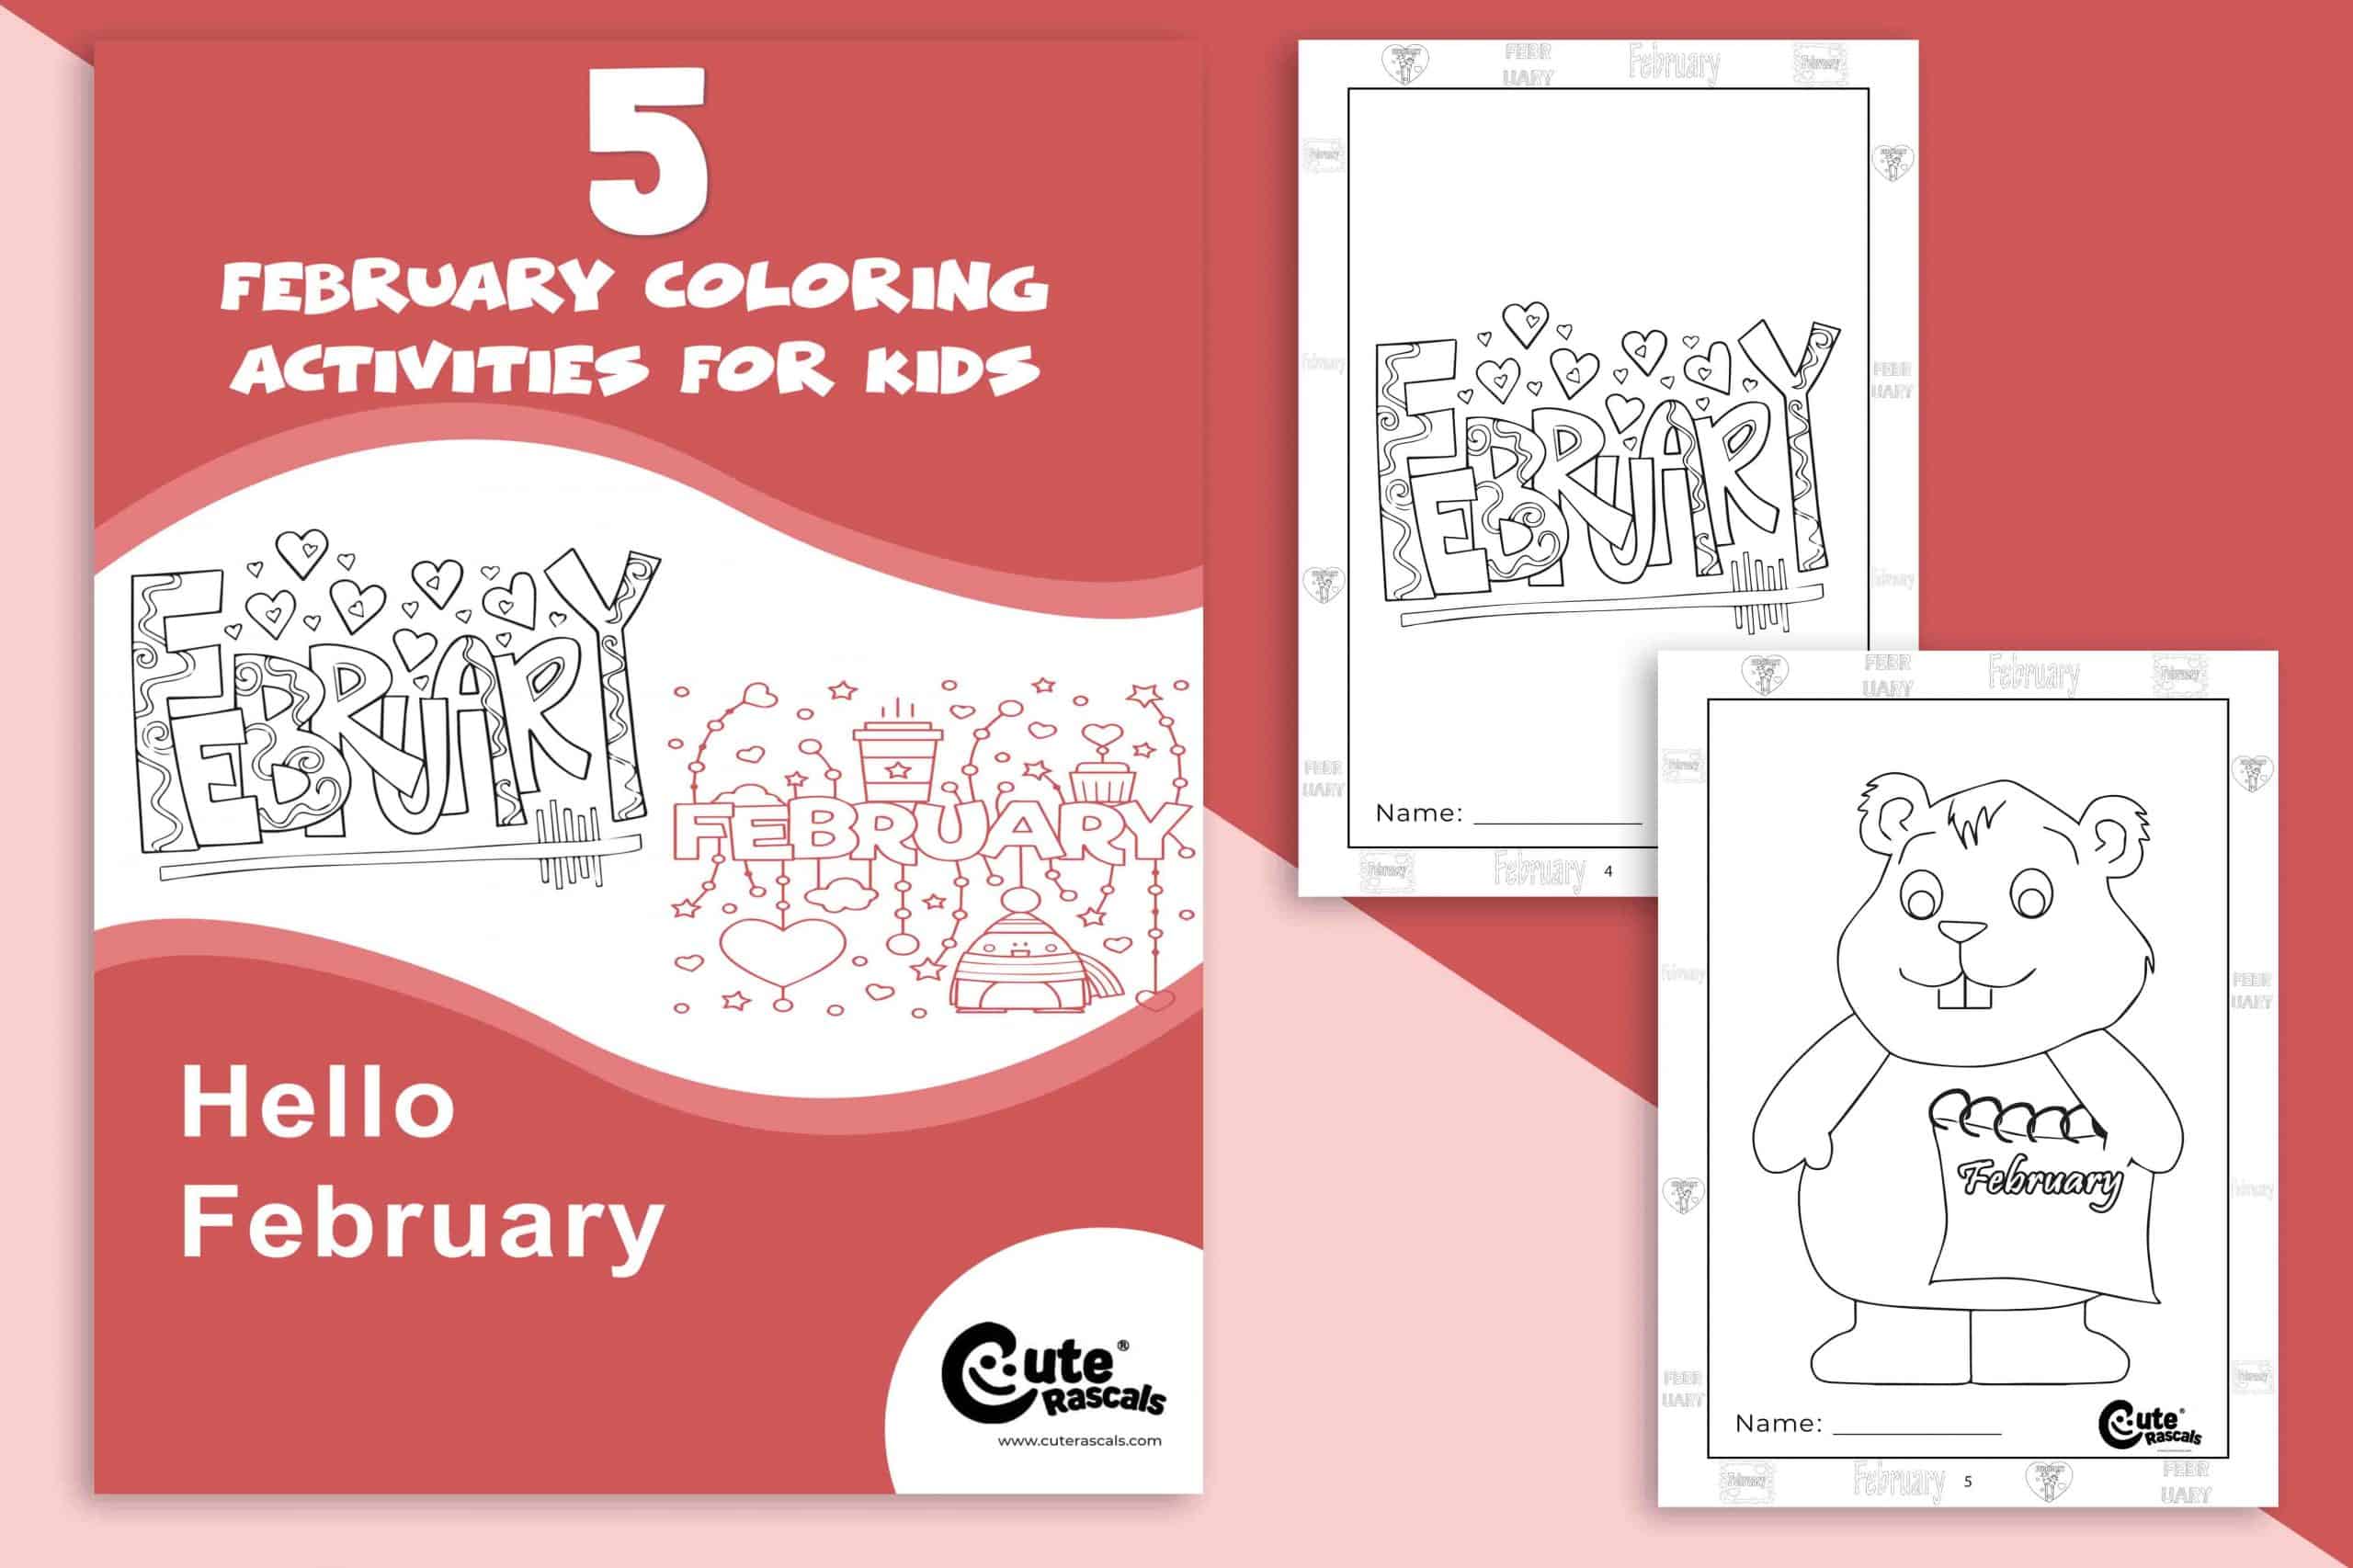 5 Beautiful February Coloring Pages for Kids to Enjoy